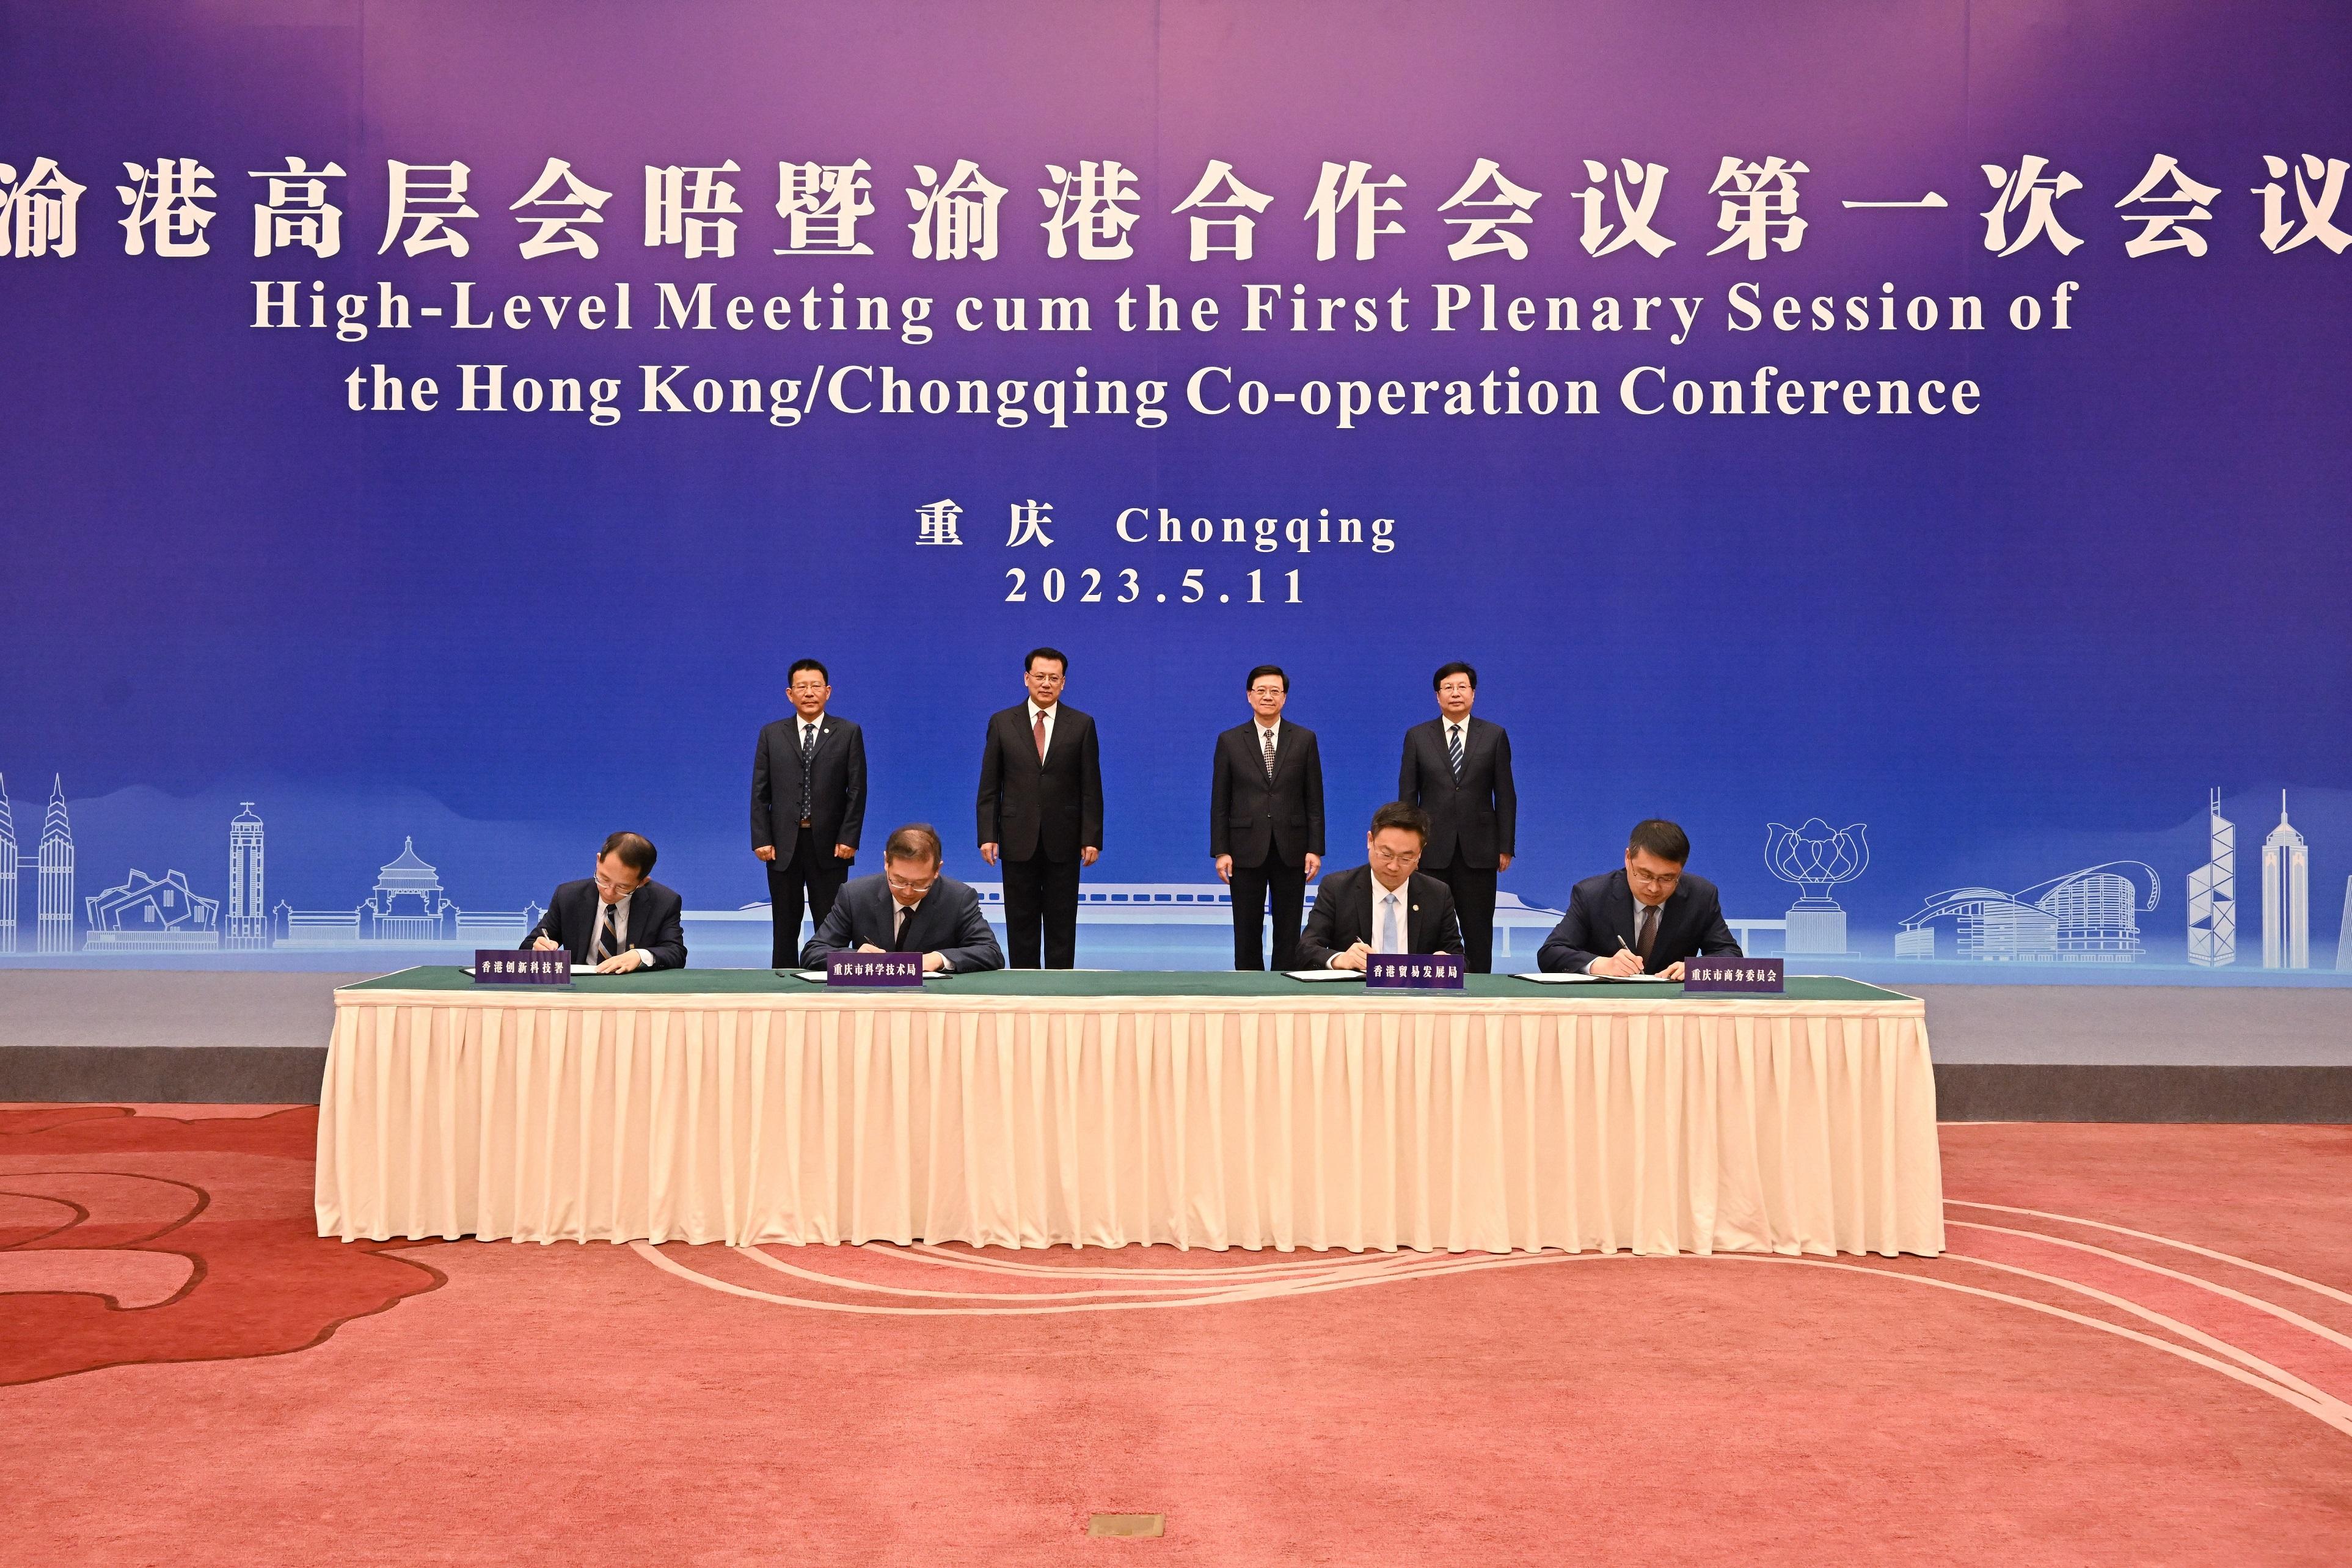 The Chief Executive, Mr John Lee, attended the High-Level Meeting cum First Plenary Session of the Hong Kong/Chongqing Co-operation Conference in Chongqing today (May 11). Photo shows (back row, from left) Deputy Director of the Hong Kong and Macao Affairs Office of the State Council Mr Wang Linggui; the Secretary of the CPC Chongqing Municipal Committee, Mr Yuan Jiajun; Mr Lee; and the Mayor of Chongqing, Mr Hu Henghua, witnessing the signing of the "Co-operation Memorandum on Innovation and Technology between Hong Kong and Chongqing" and the "Strategic Co-operation Memorandum between Chongqing Municipal Commission of Commerce and Hong Kong Trade Development Council".